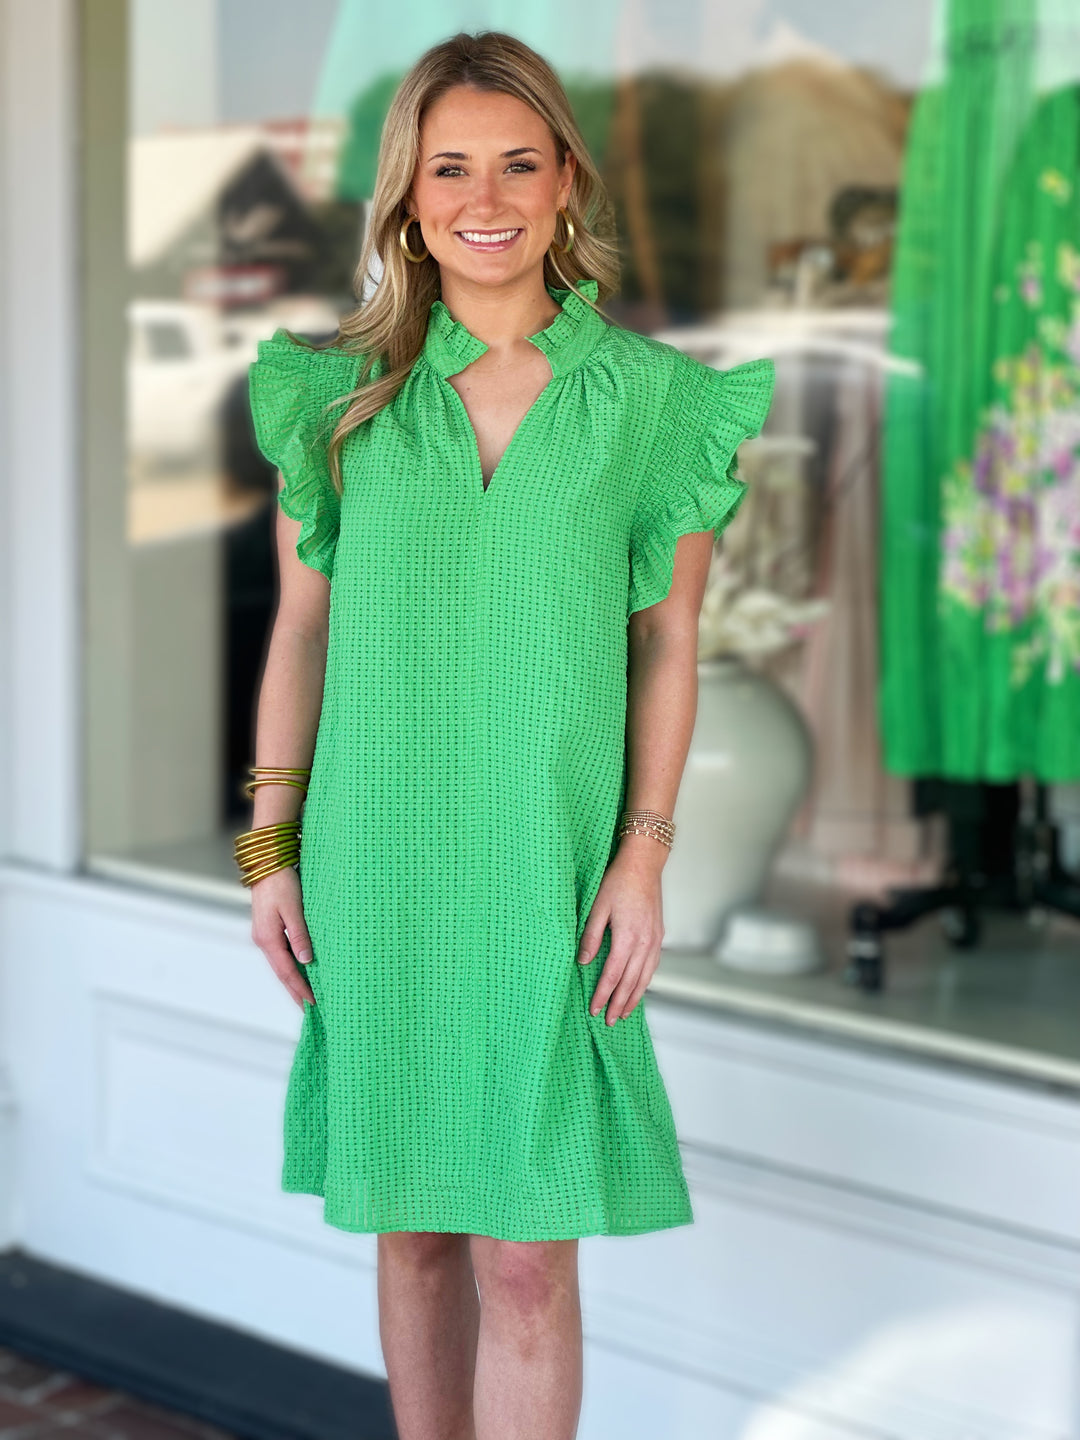 Find Your Path Green Dress